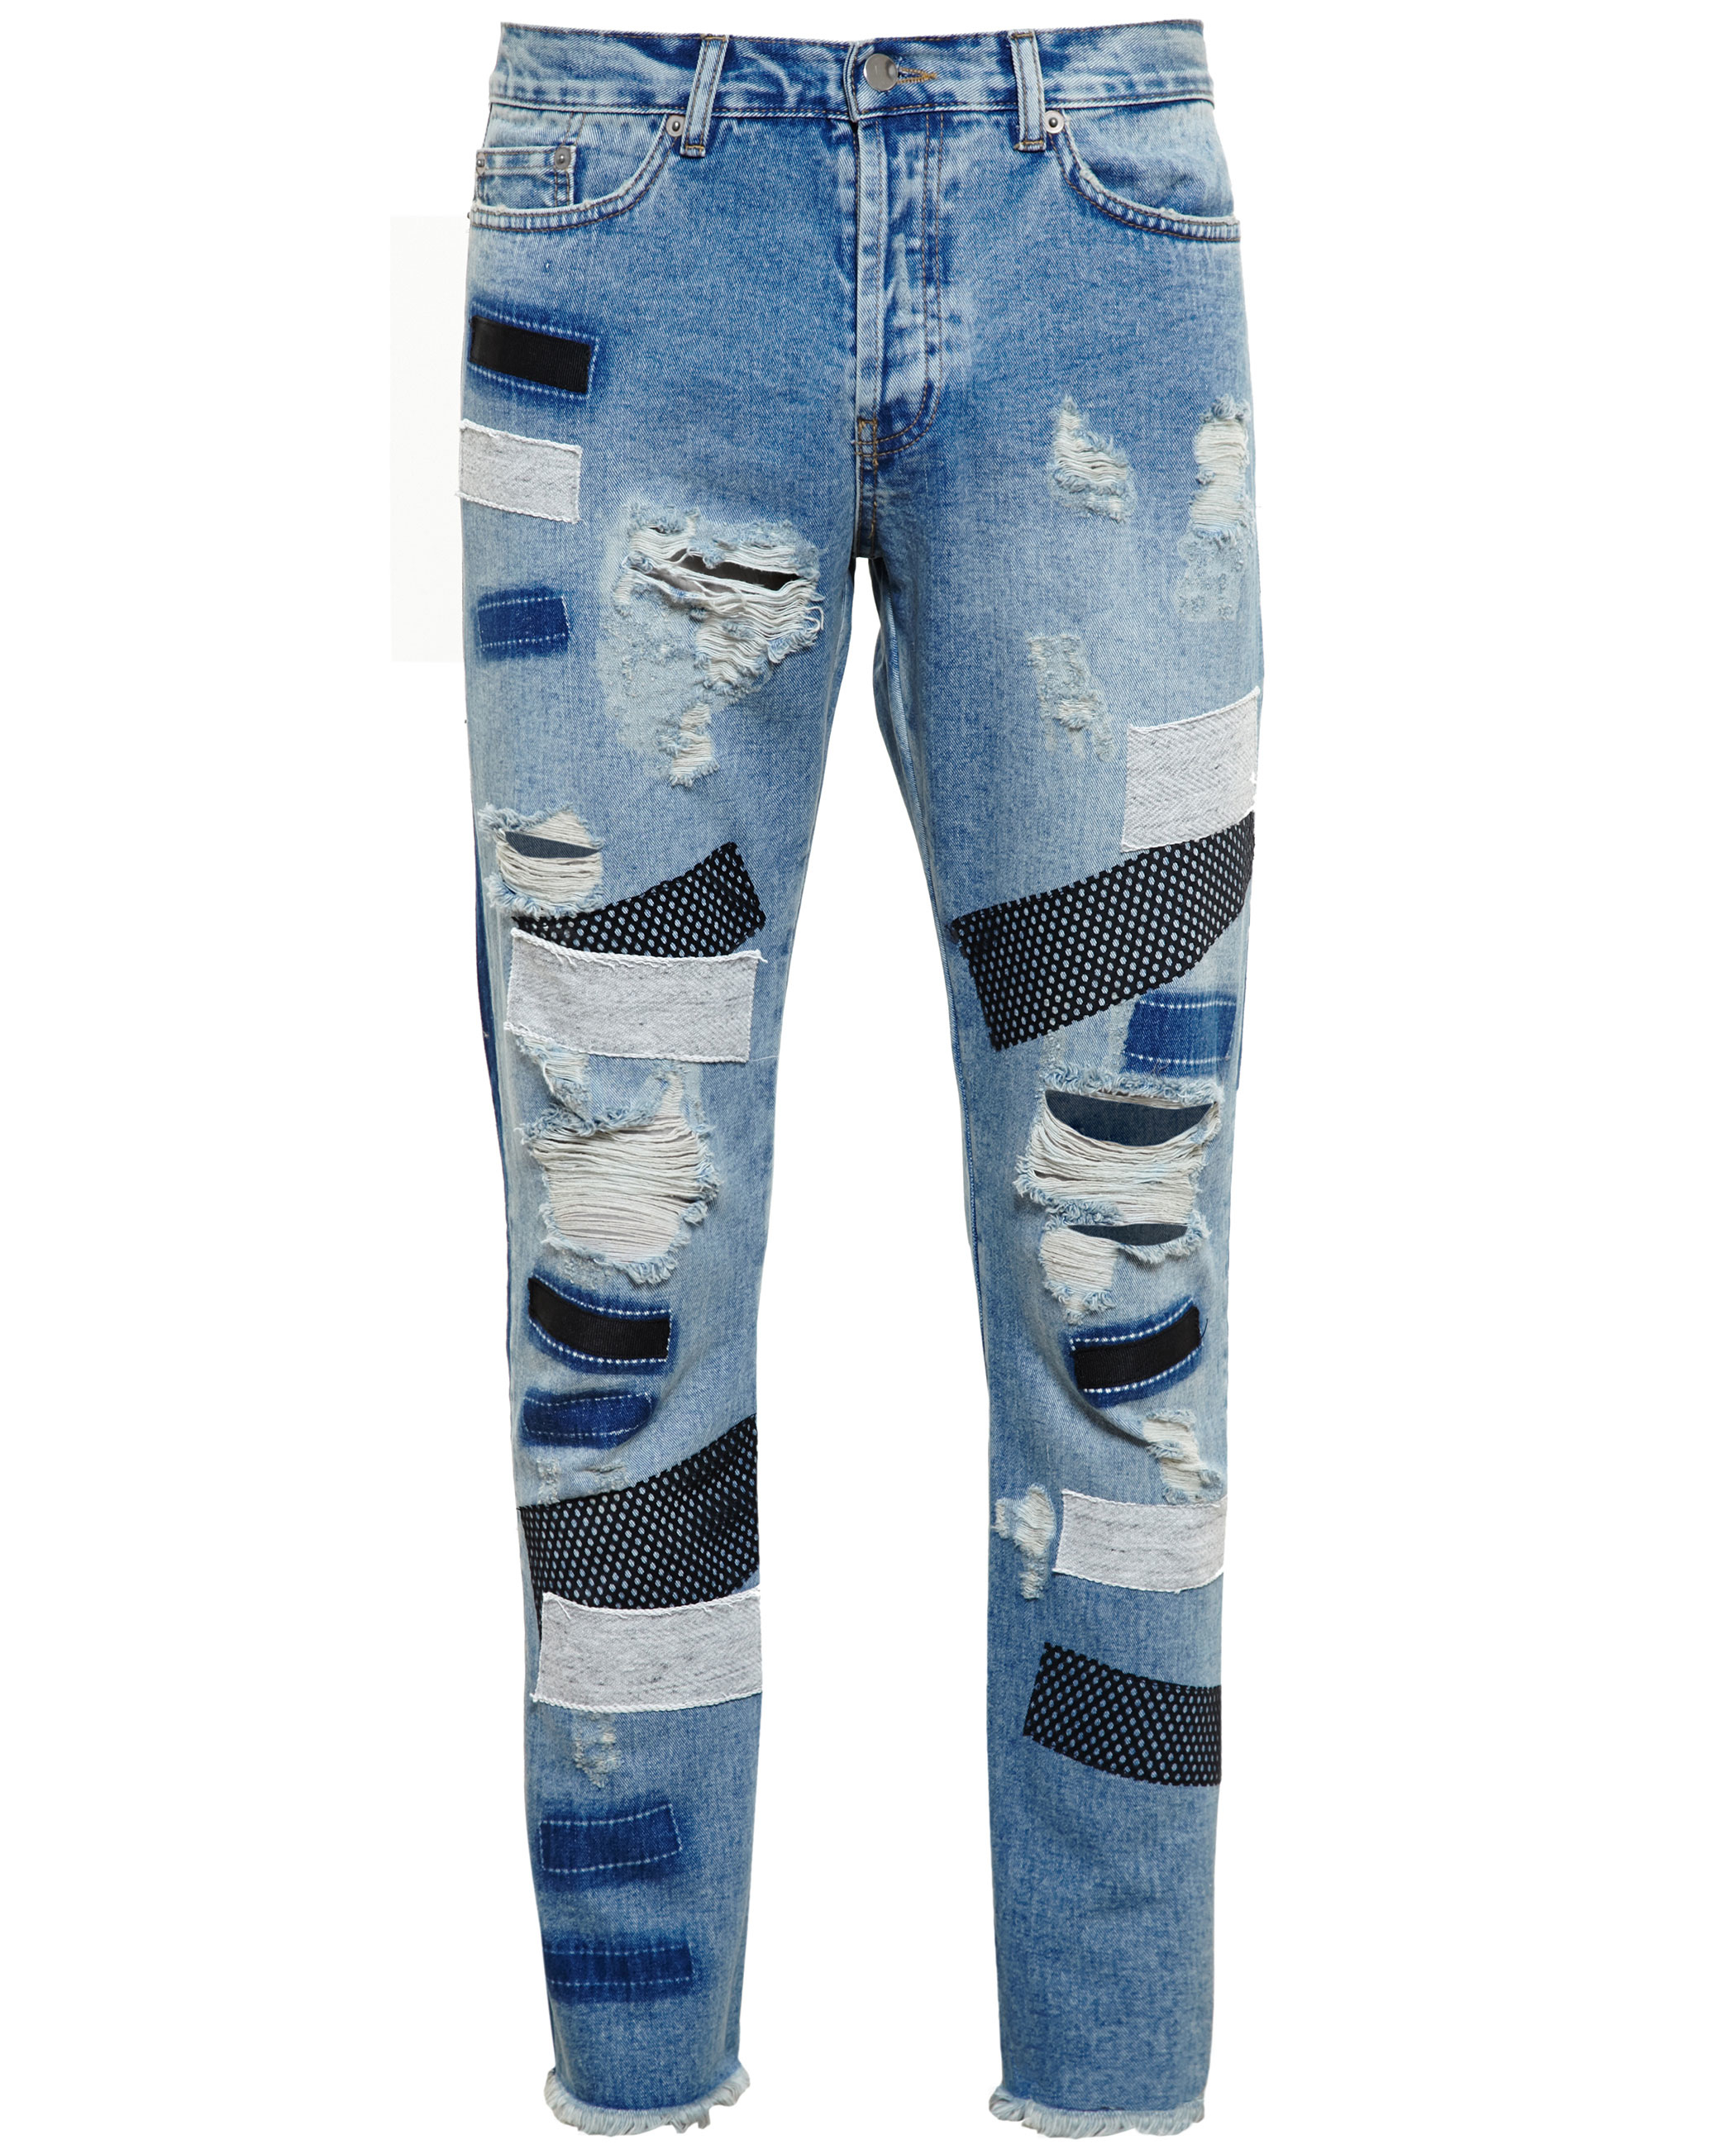 Lyst - James Long Distressed Patchwork Jeans in Blue for Men